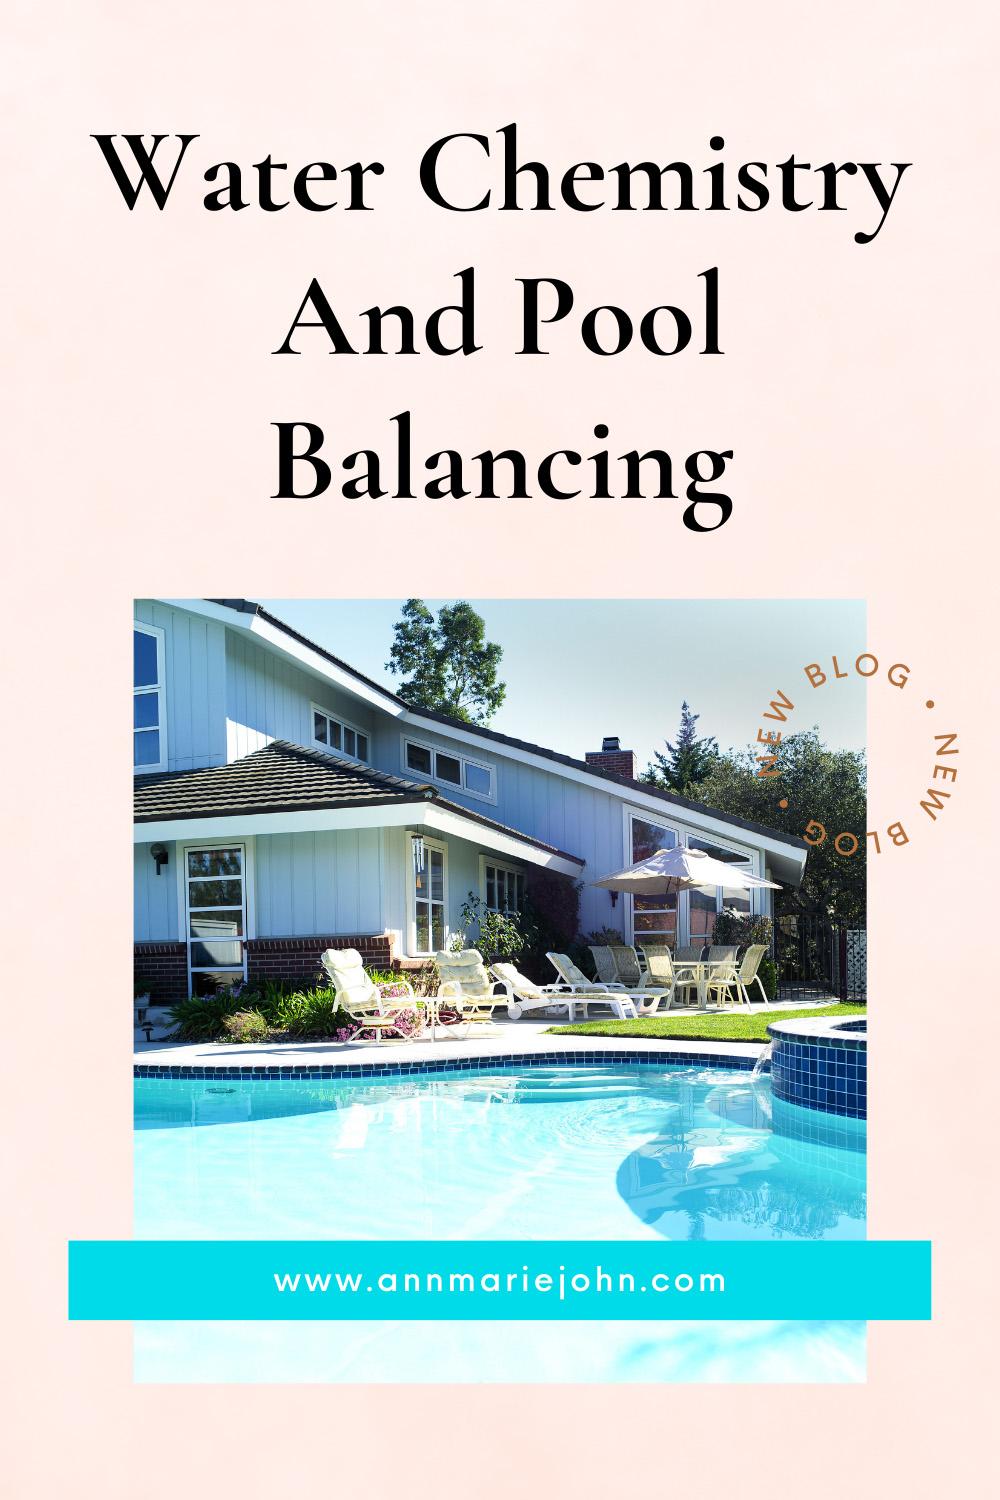 Water Chemistry And Pool Balancing